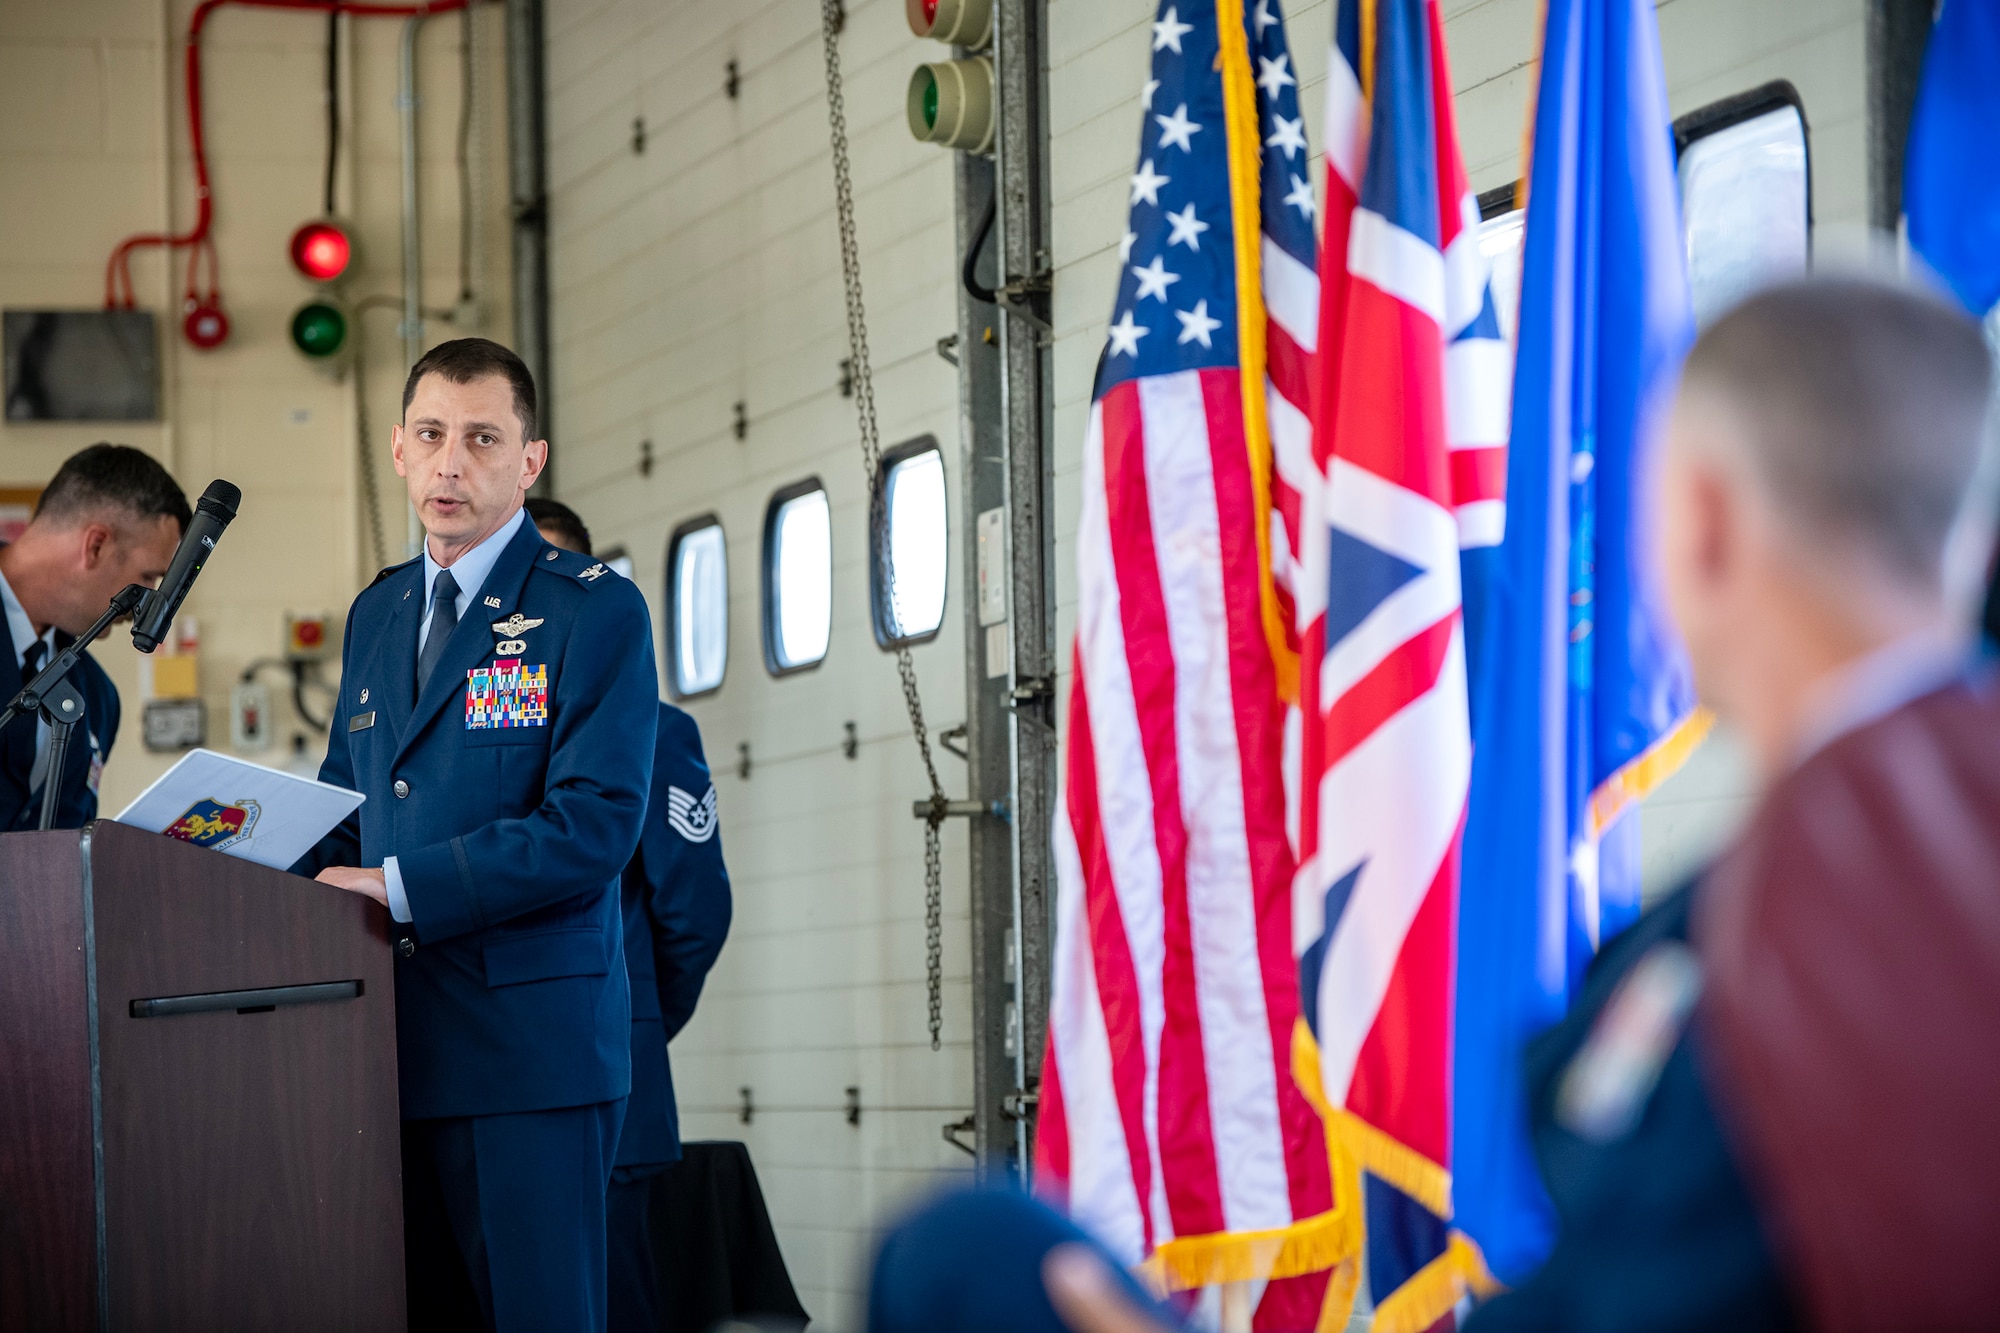 U.S. Air Force Col. Edward Spinelli, 422d Air Base Group commander, speaks during a change of command ceremony at RAF Croughton, England, June 15, 2023.  Lt. Col. Jethro Sadorra relinquished command of the 422d Civil Engineer Squadron to Maj. Kirk Hull. (U.S. Air Force photo by Staff Sgt. Eugene Oliver)